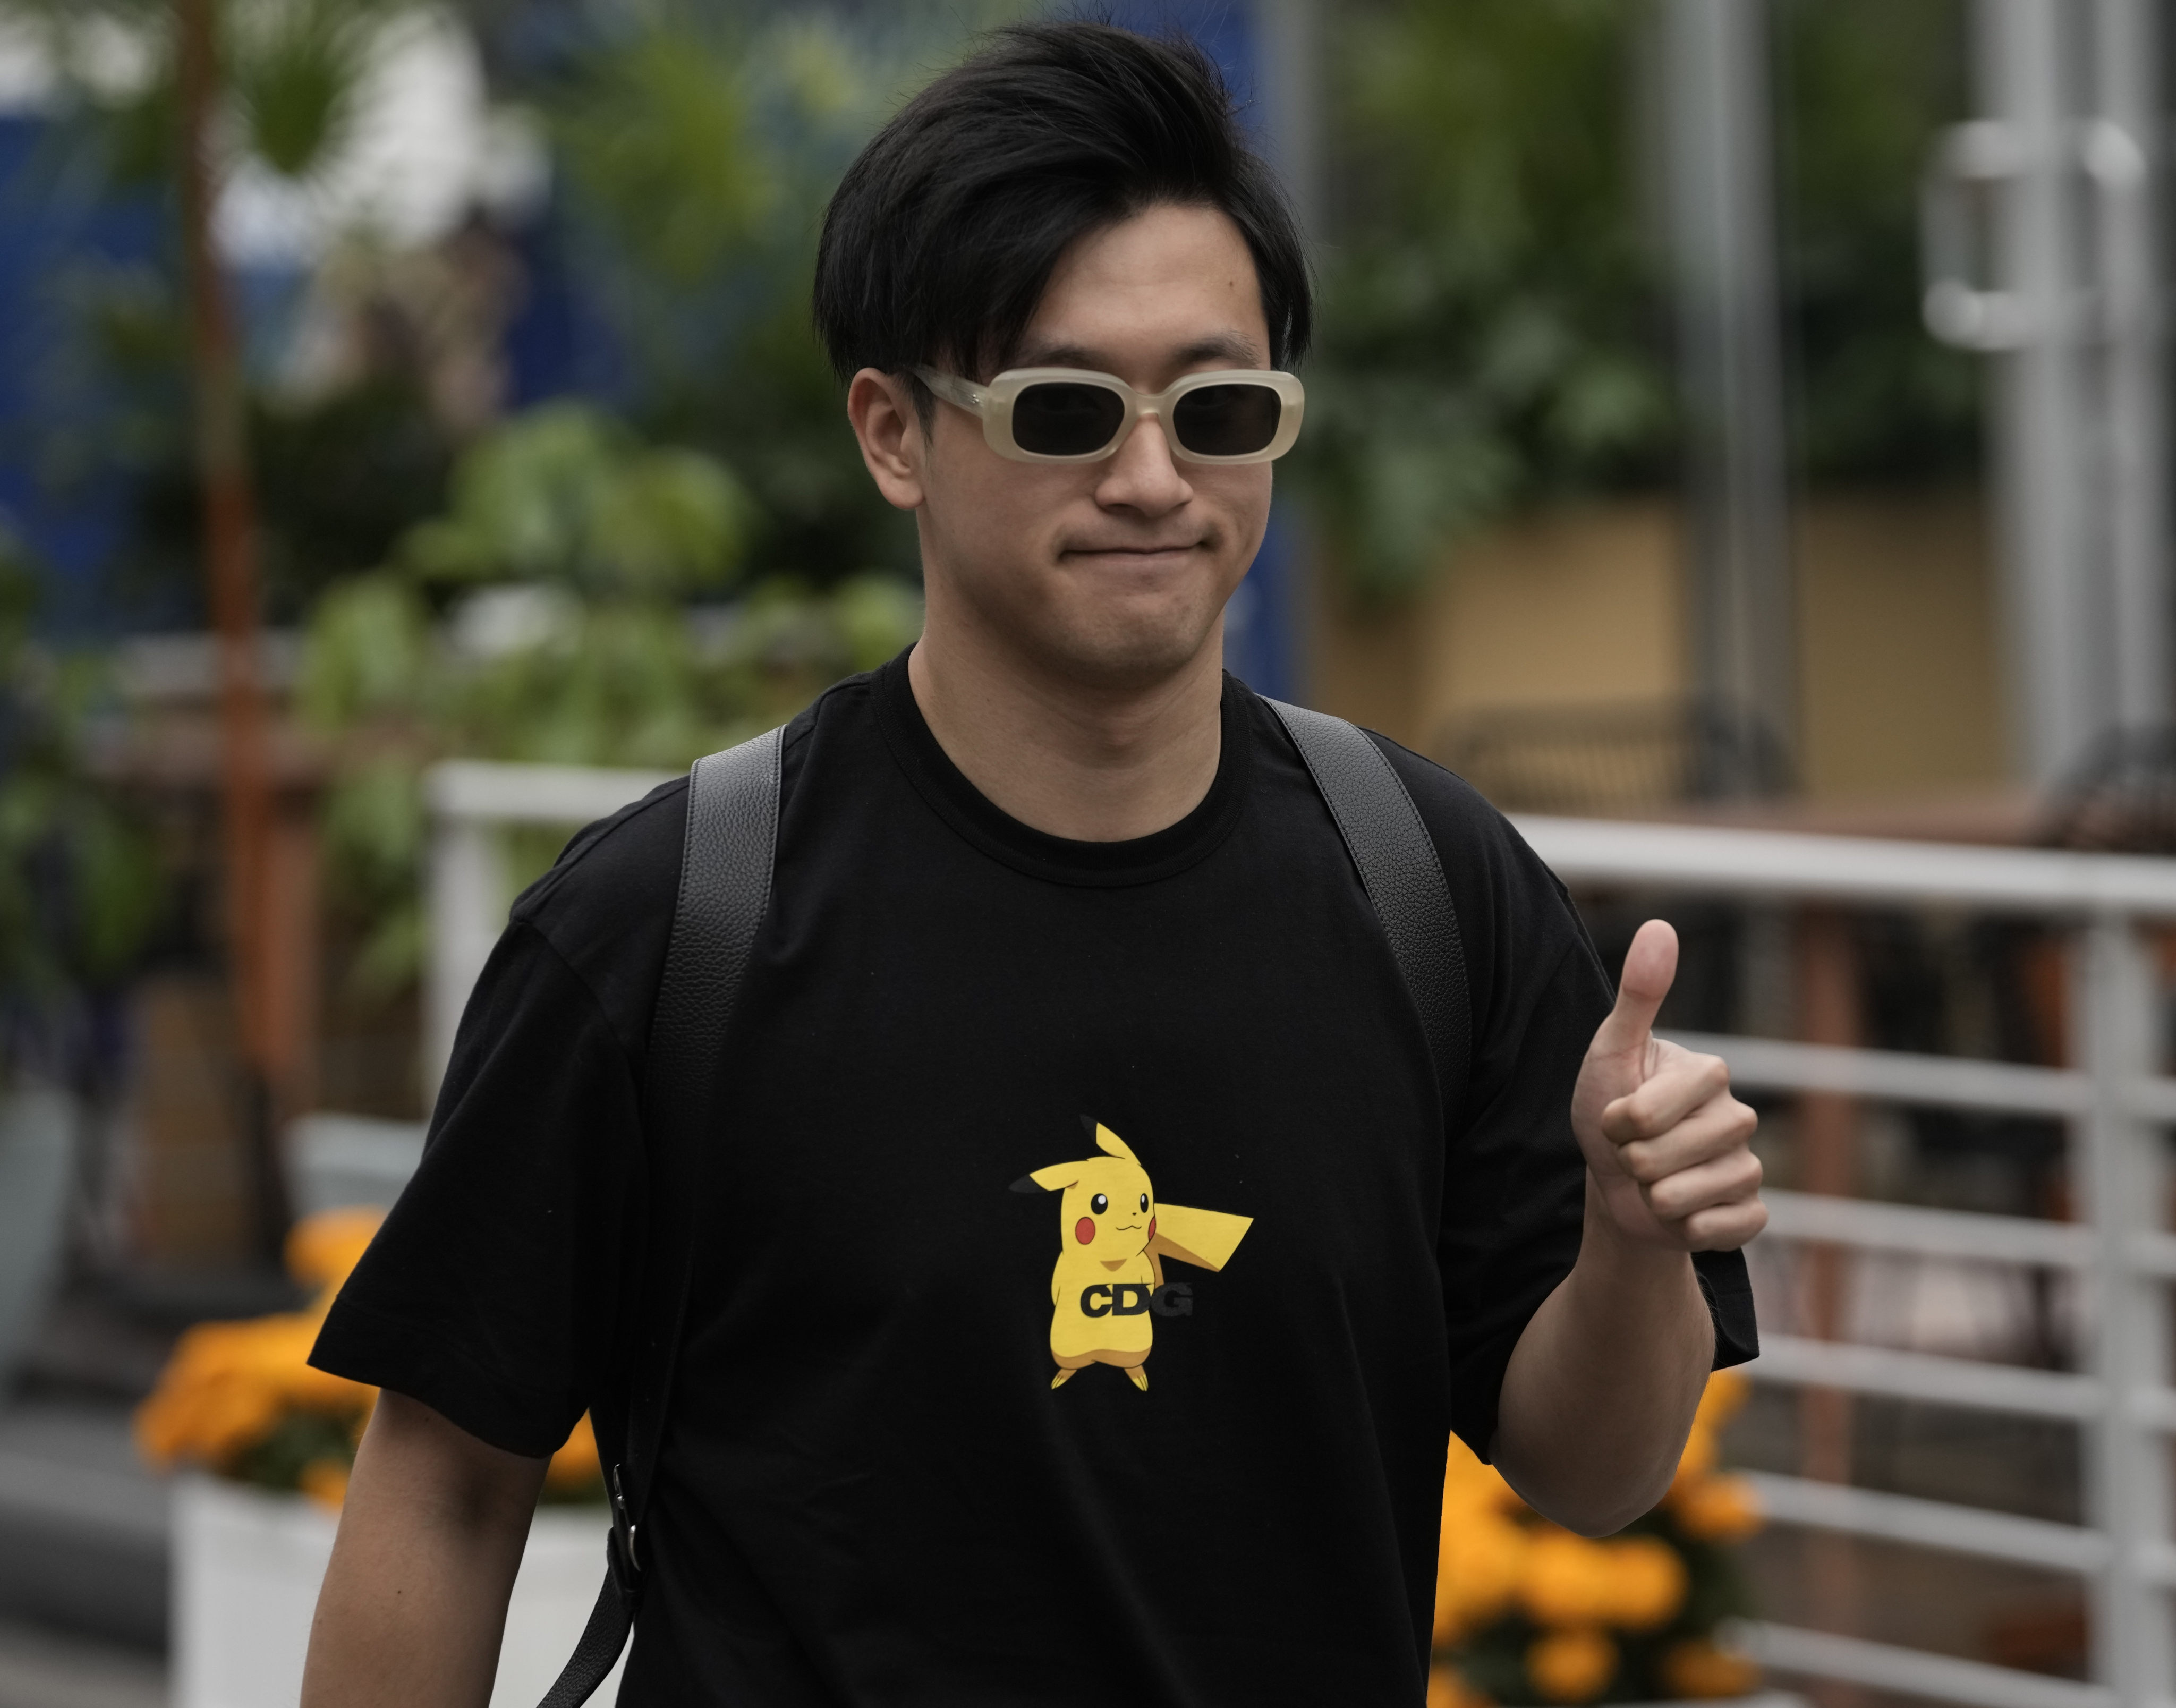 Zhou Guanyu gives a thumbs up upon his arrival for the first day of the Mexico Grand Prix. Photo: AP